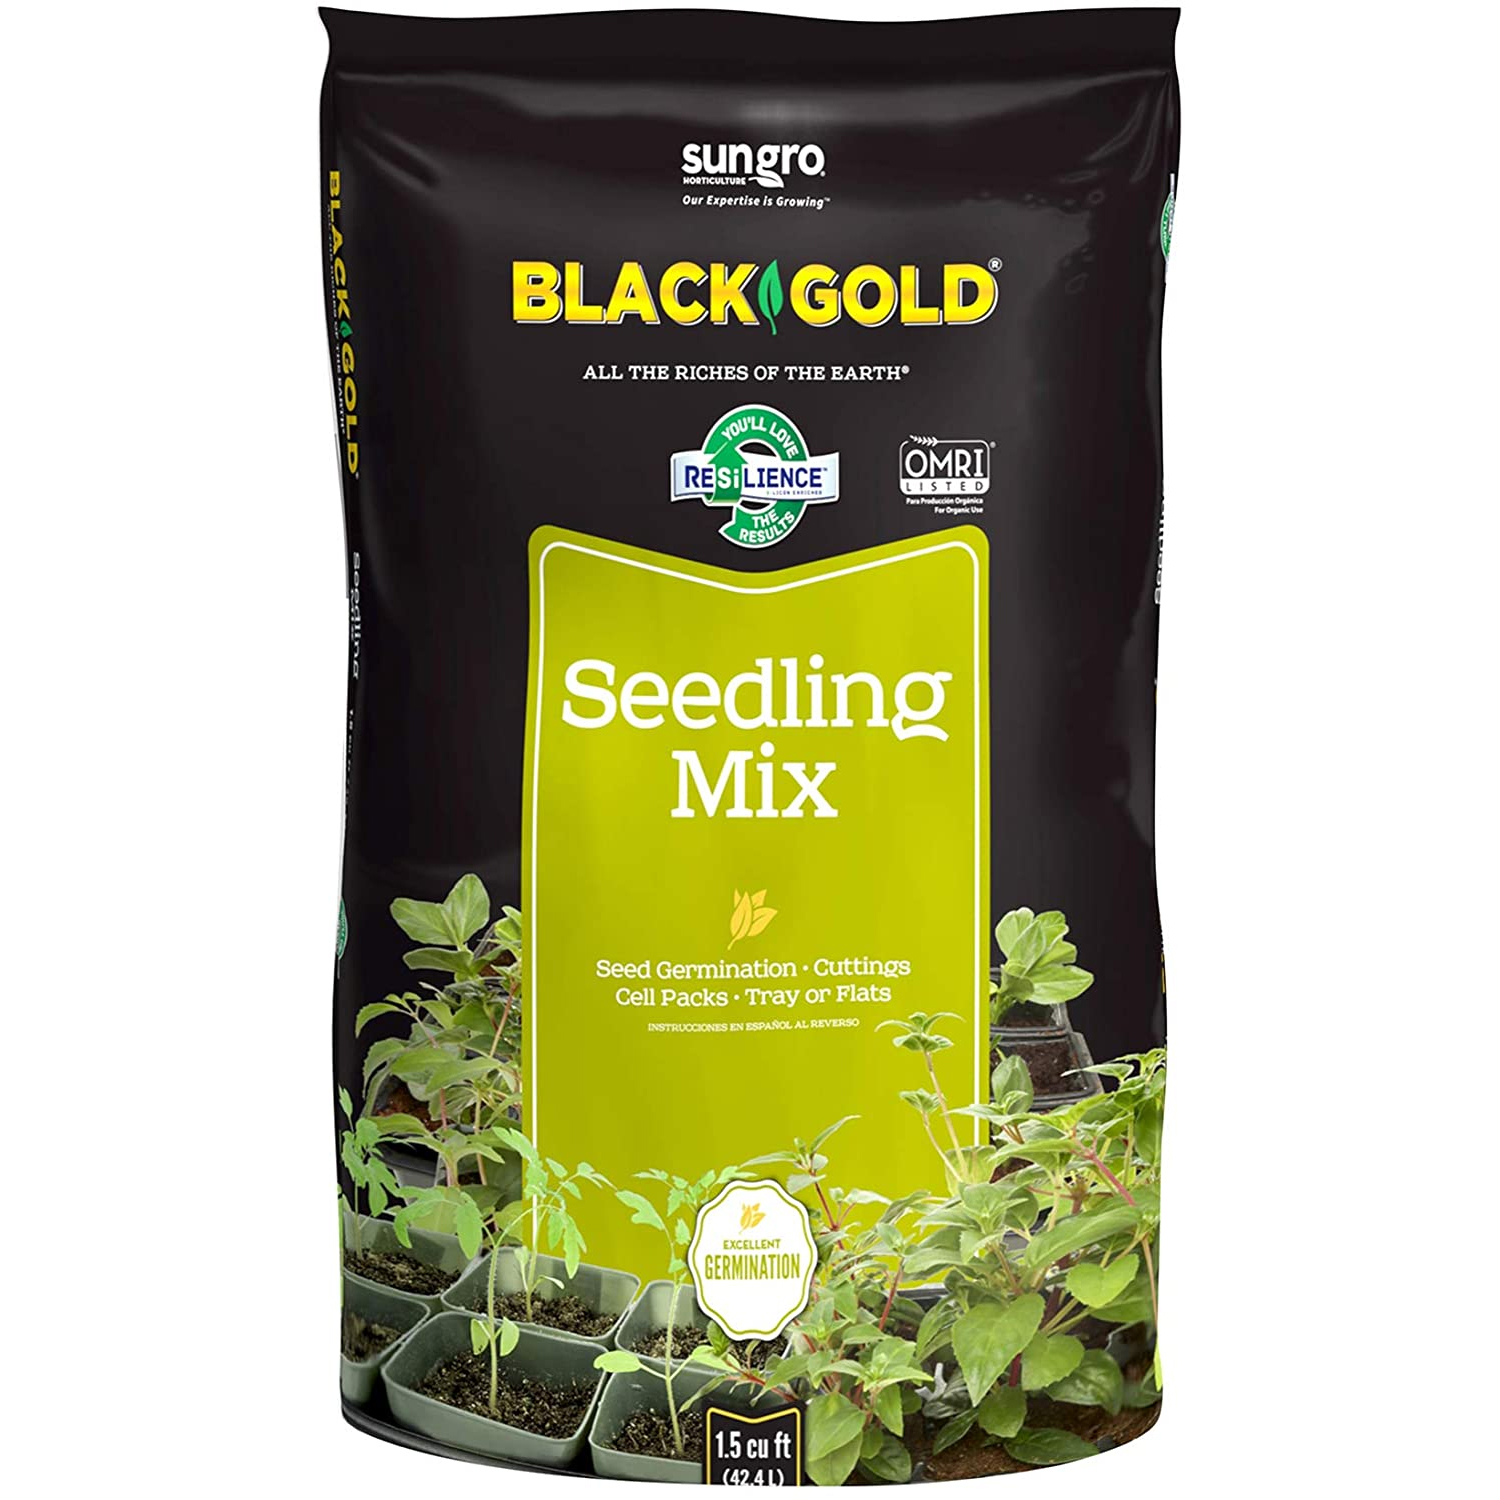 Sungro Black Gold Seedling Mix with RESiLIENCE, 1.5 CF Soil Mix - image 1 of 2